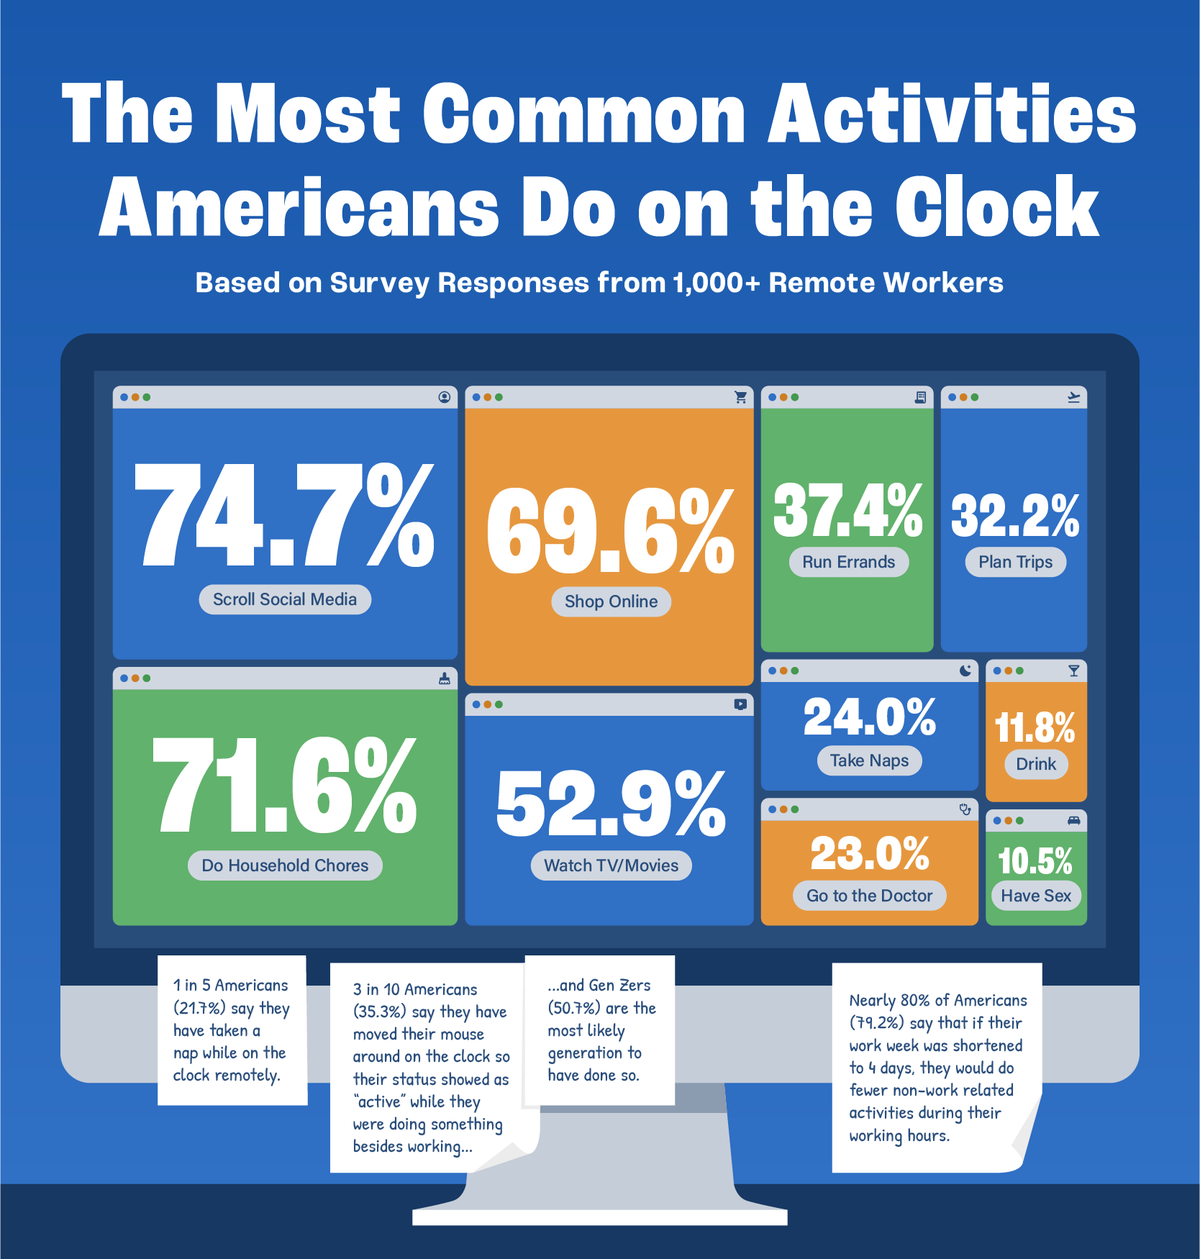 Bar chart representing the most common non-work activities Americans admit to doing on the clock remotely.